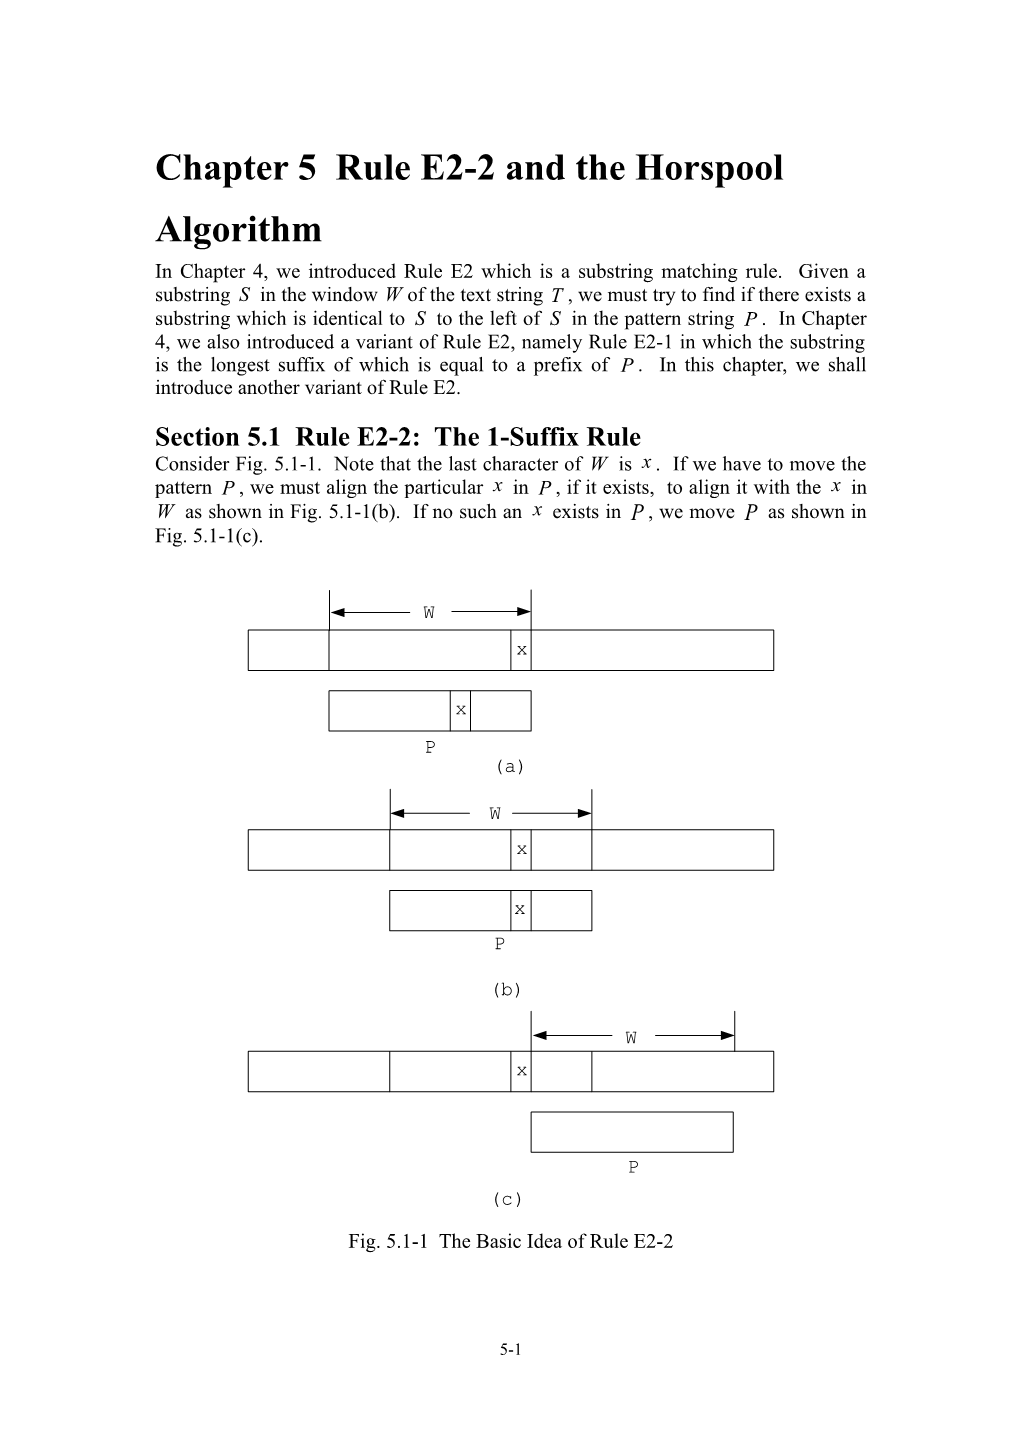 Chapter 5 Rule E2-2 and the Horspool Algorithm